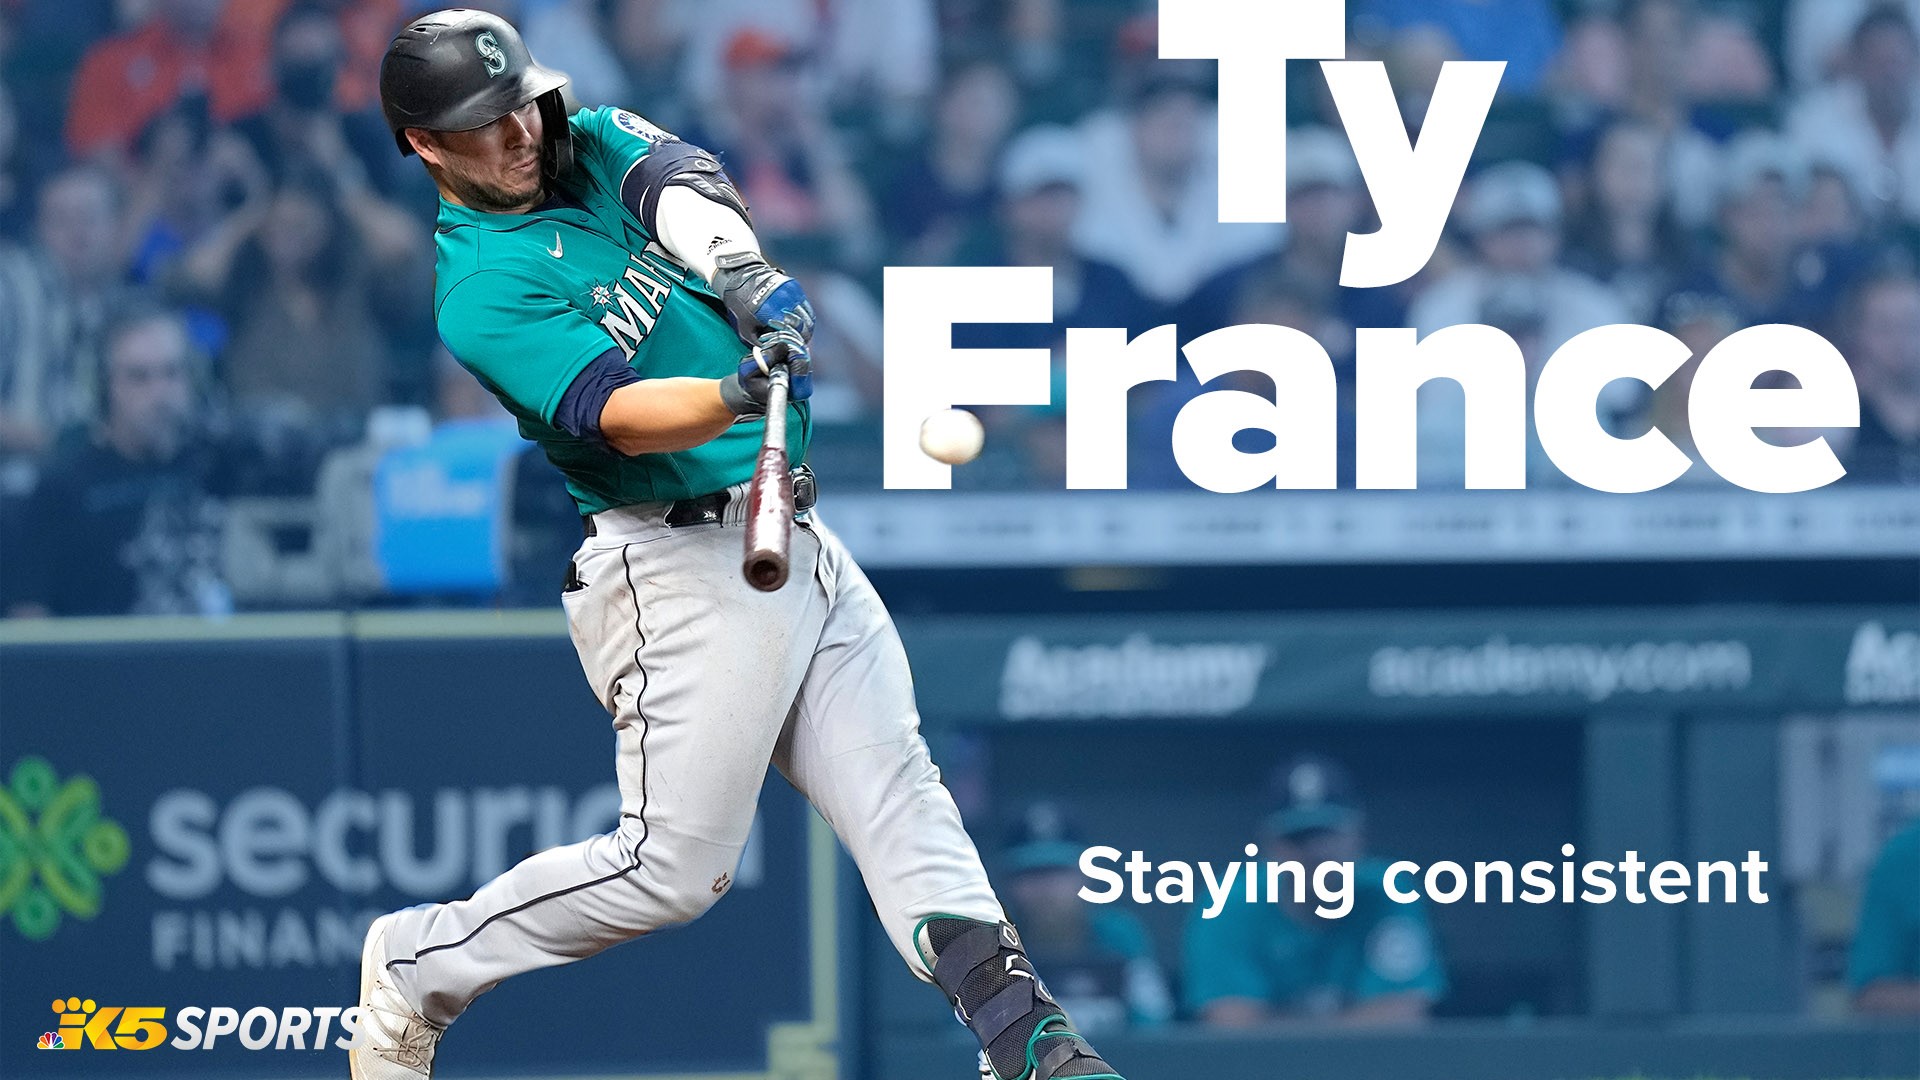 Ty France stepped in last season and showed his reliable bat and locker room presence were invaluable resources